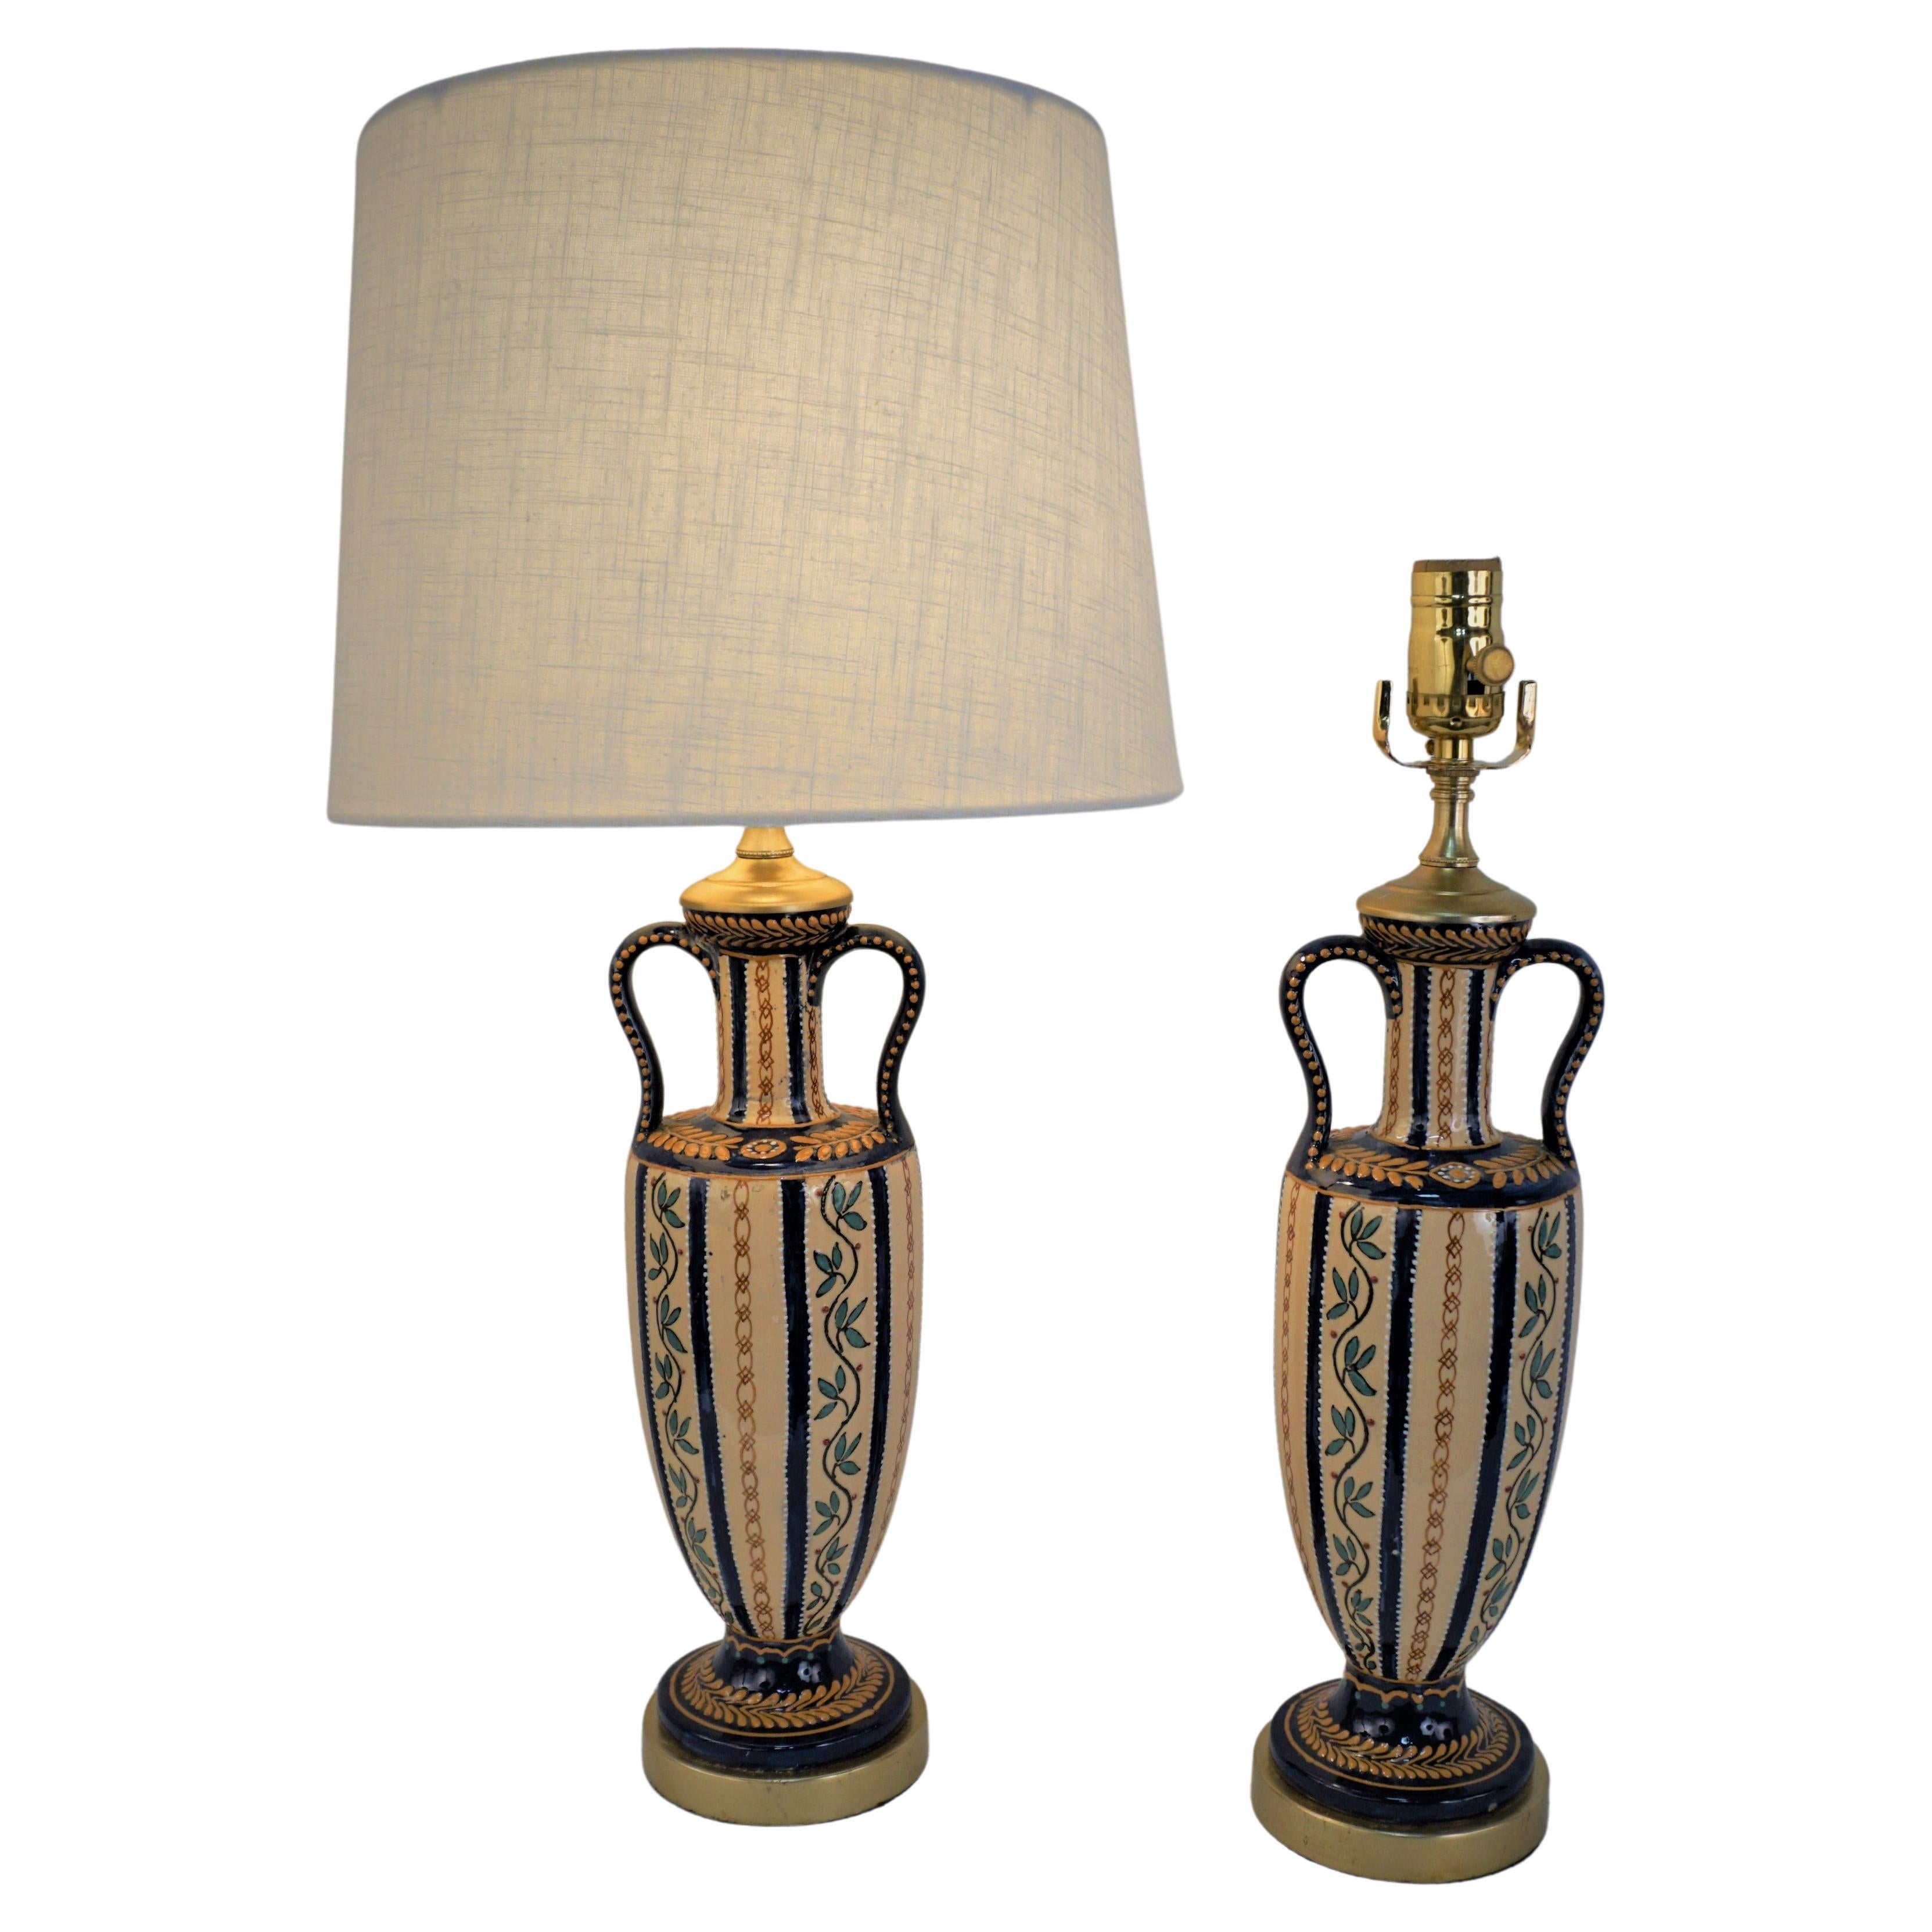 Pair of 1930's Hand Painted Ceramic Table Lamps